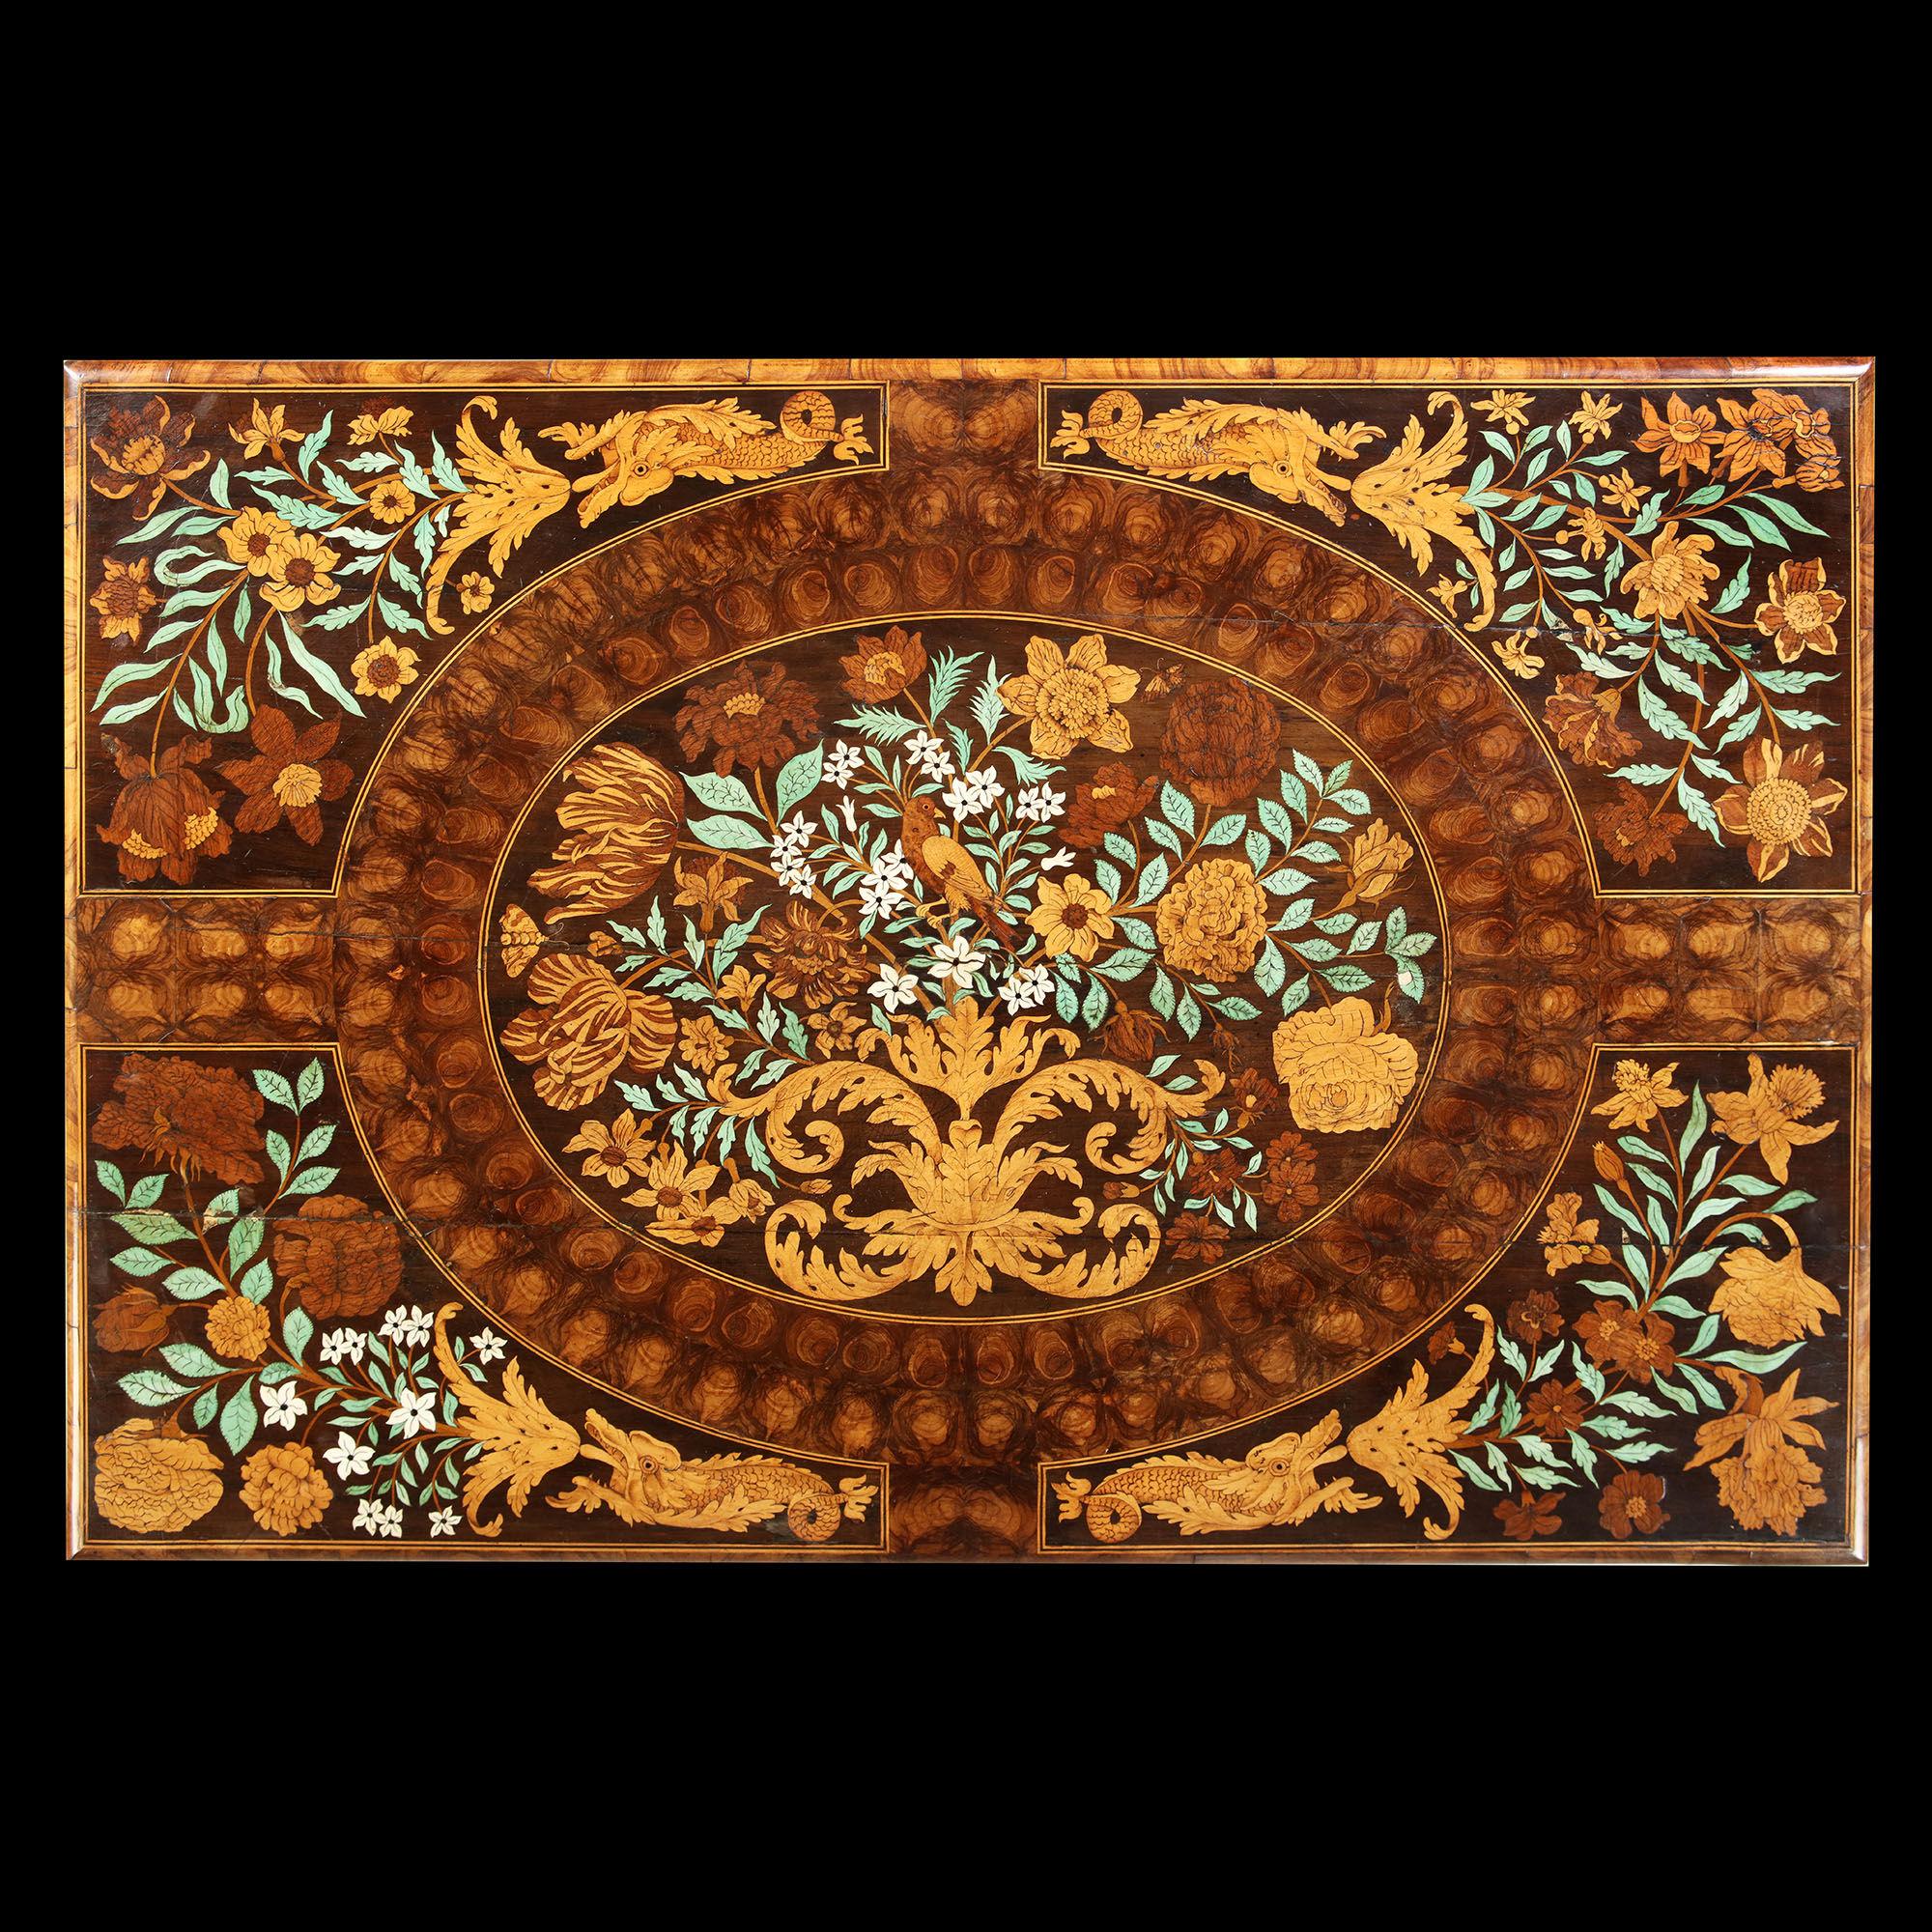 Charles II olive oyster floral marquetry table, attributed to Gerrit Jensen in Association with Gole.

This accomplished Charles II marquetry table clearly bears the influence of Dutch and French masters of marquetry working in the last quarter of